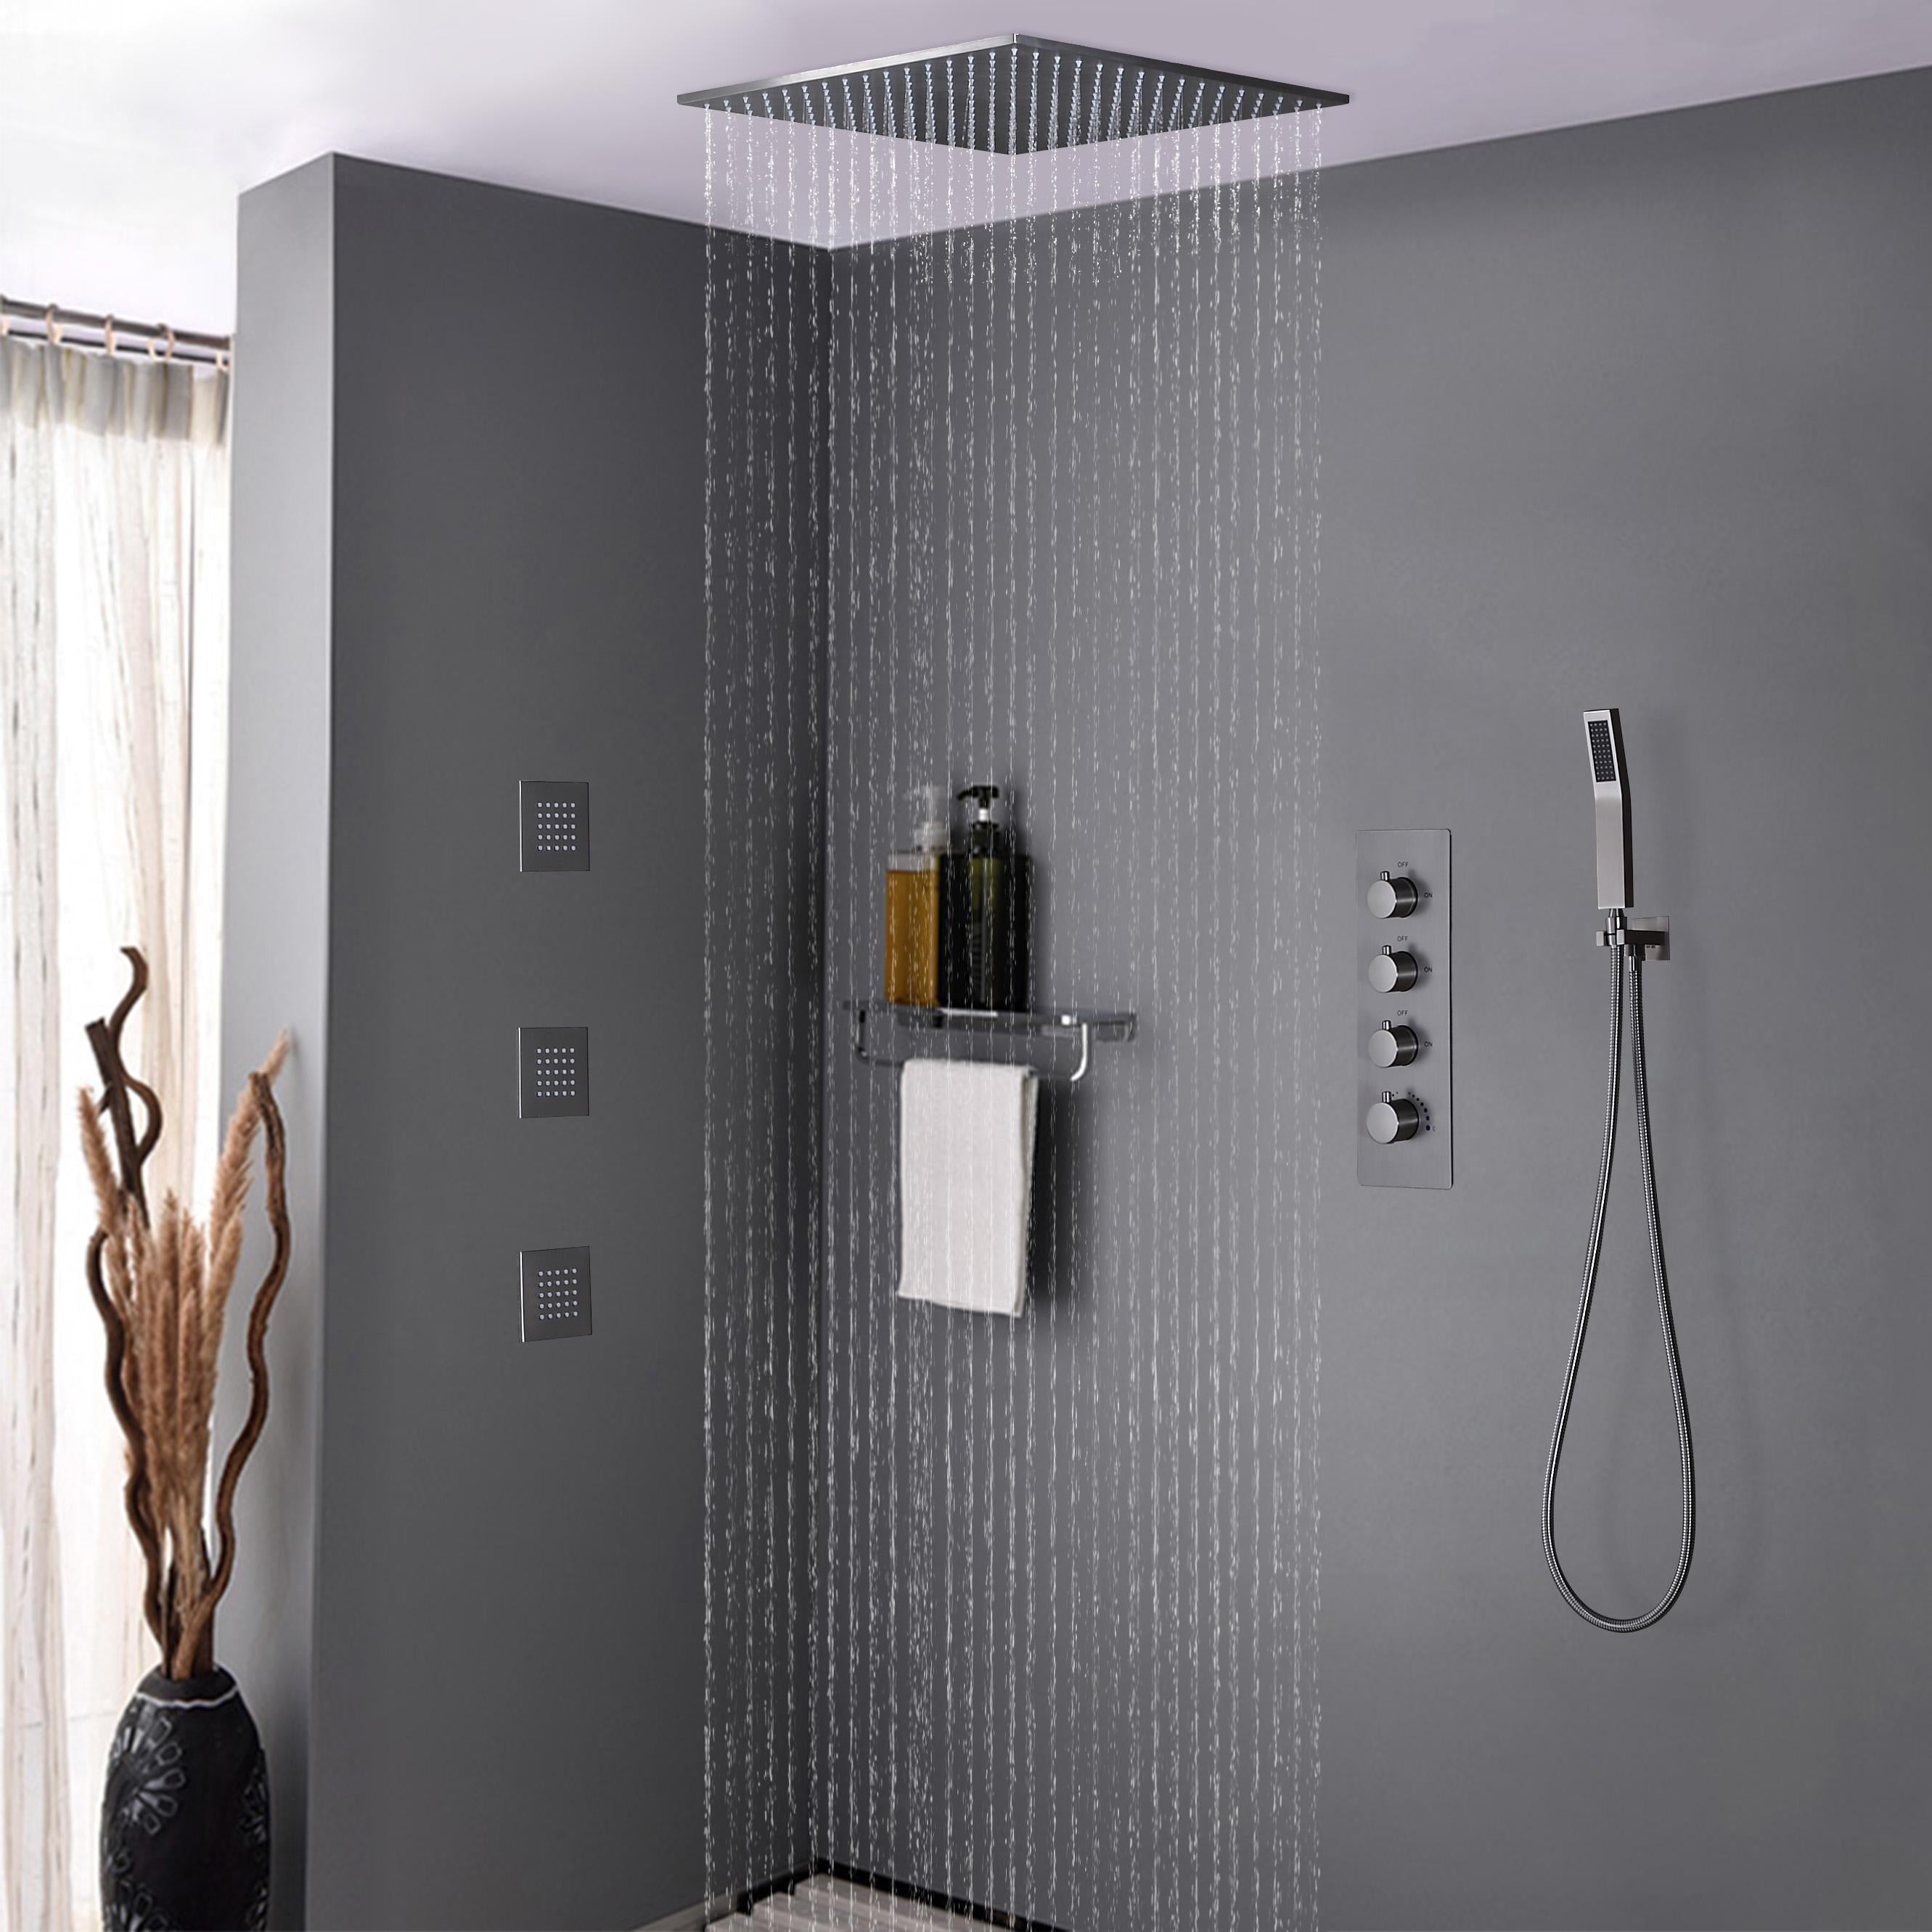 Brushed Nickel Thermostatic Shower Faucet Stainless Steel Shower System  with Tub Spout